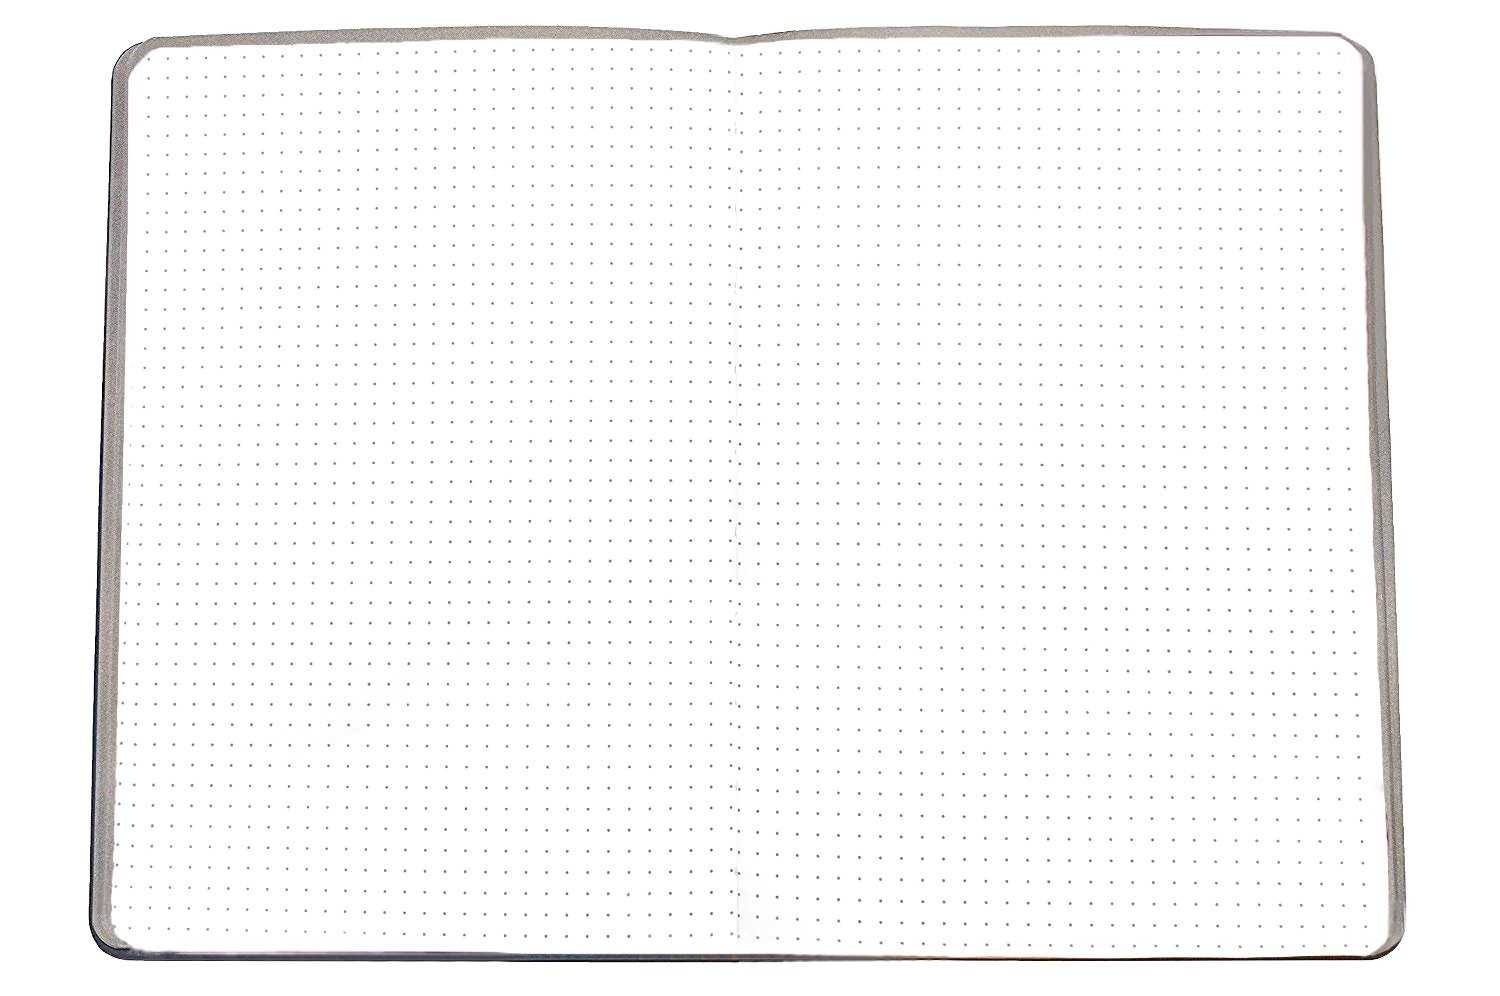 Best Lay-flat 180° Notebook Journal With Dotted Grid & Lined Ruled Pages | Perfect Diary Agenda For Writing, Drawing & Taking Notes | Deluxe Faux Leather Personal Organizer | A5 Sized (8.5" L x 6.1" W x 1.3" H) | Transcending Waves Planner